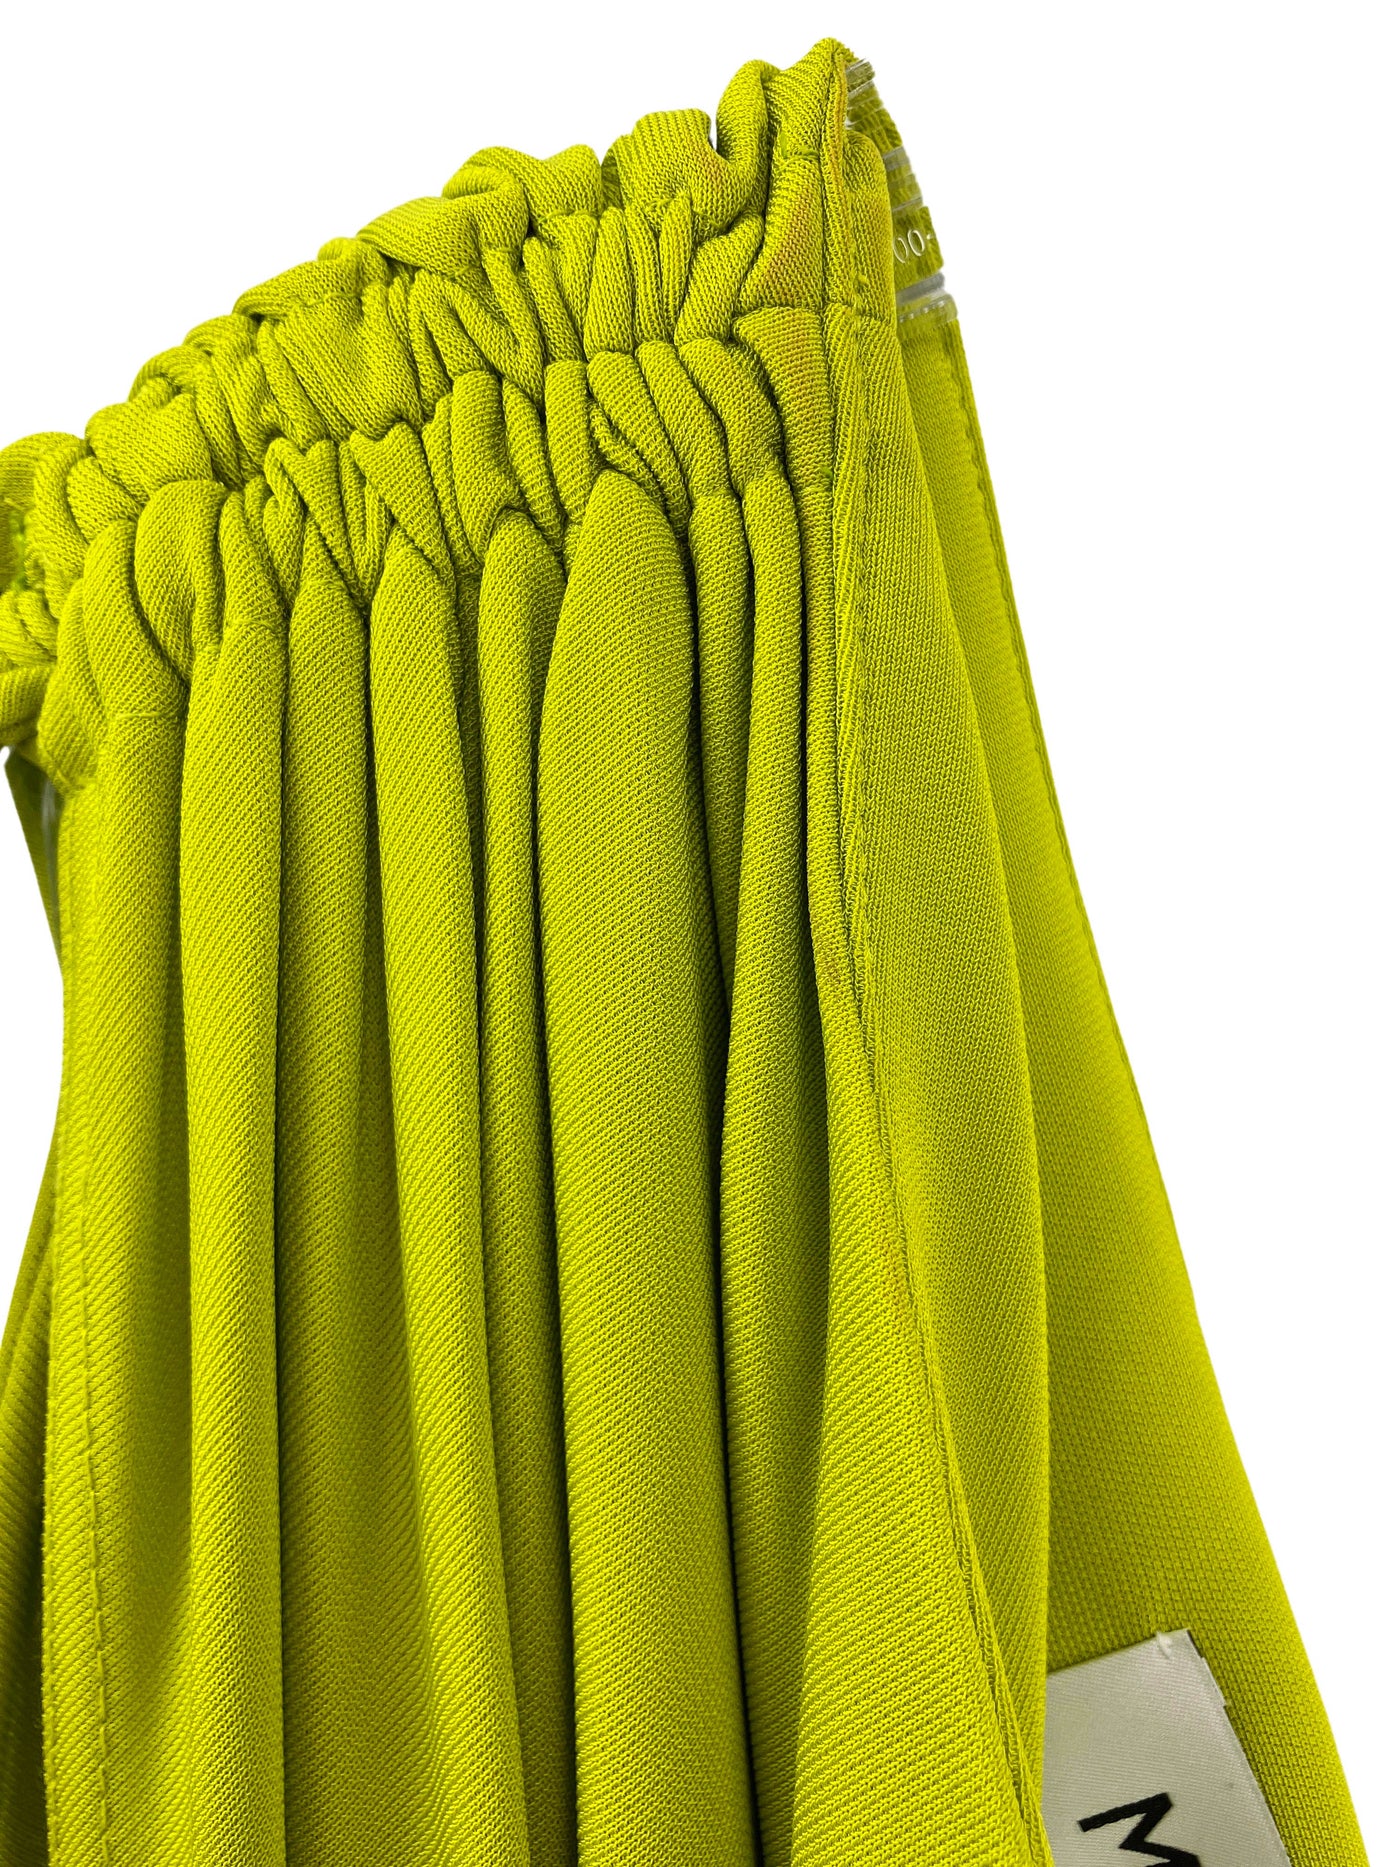 Monse One Shoulder Draped Dress in Lime - Discounts on Monse at UAL